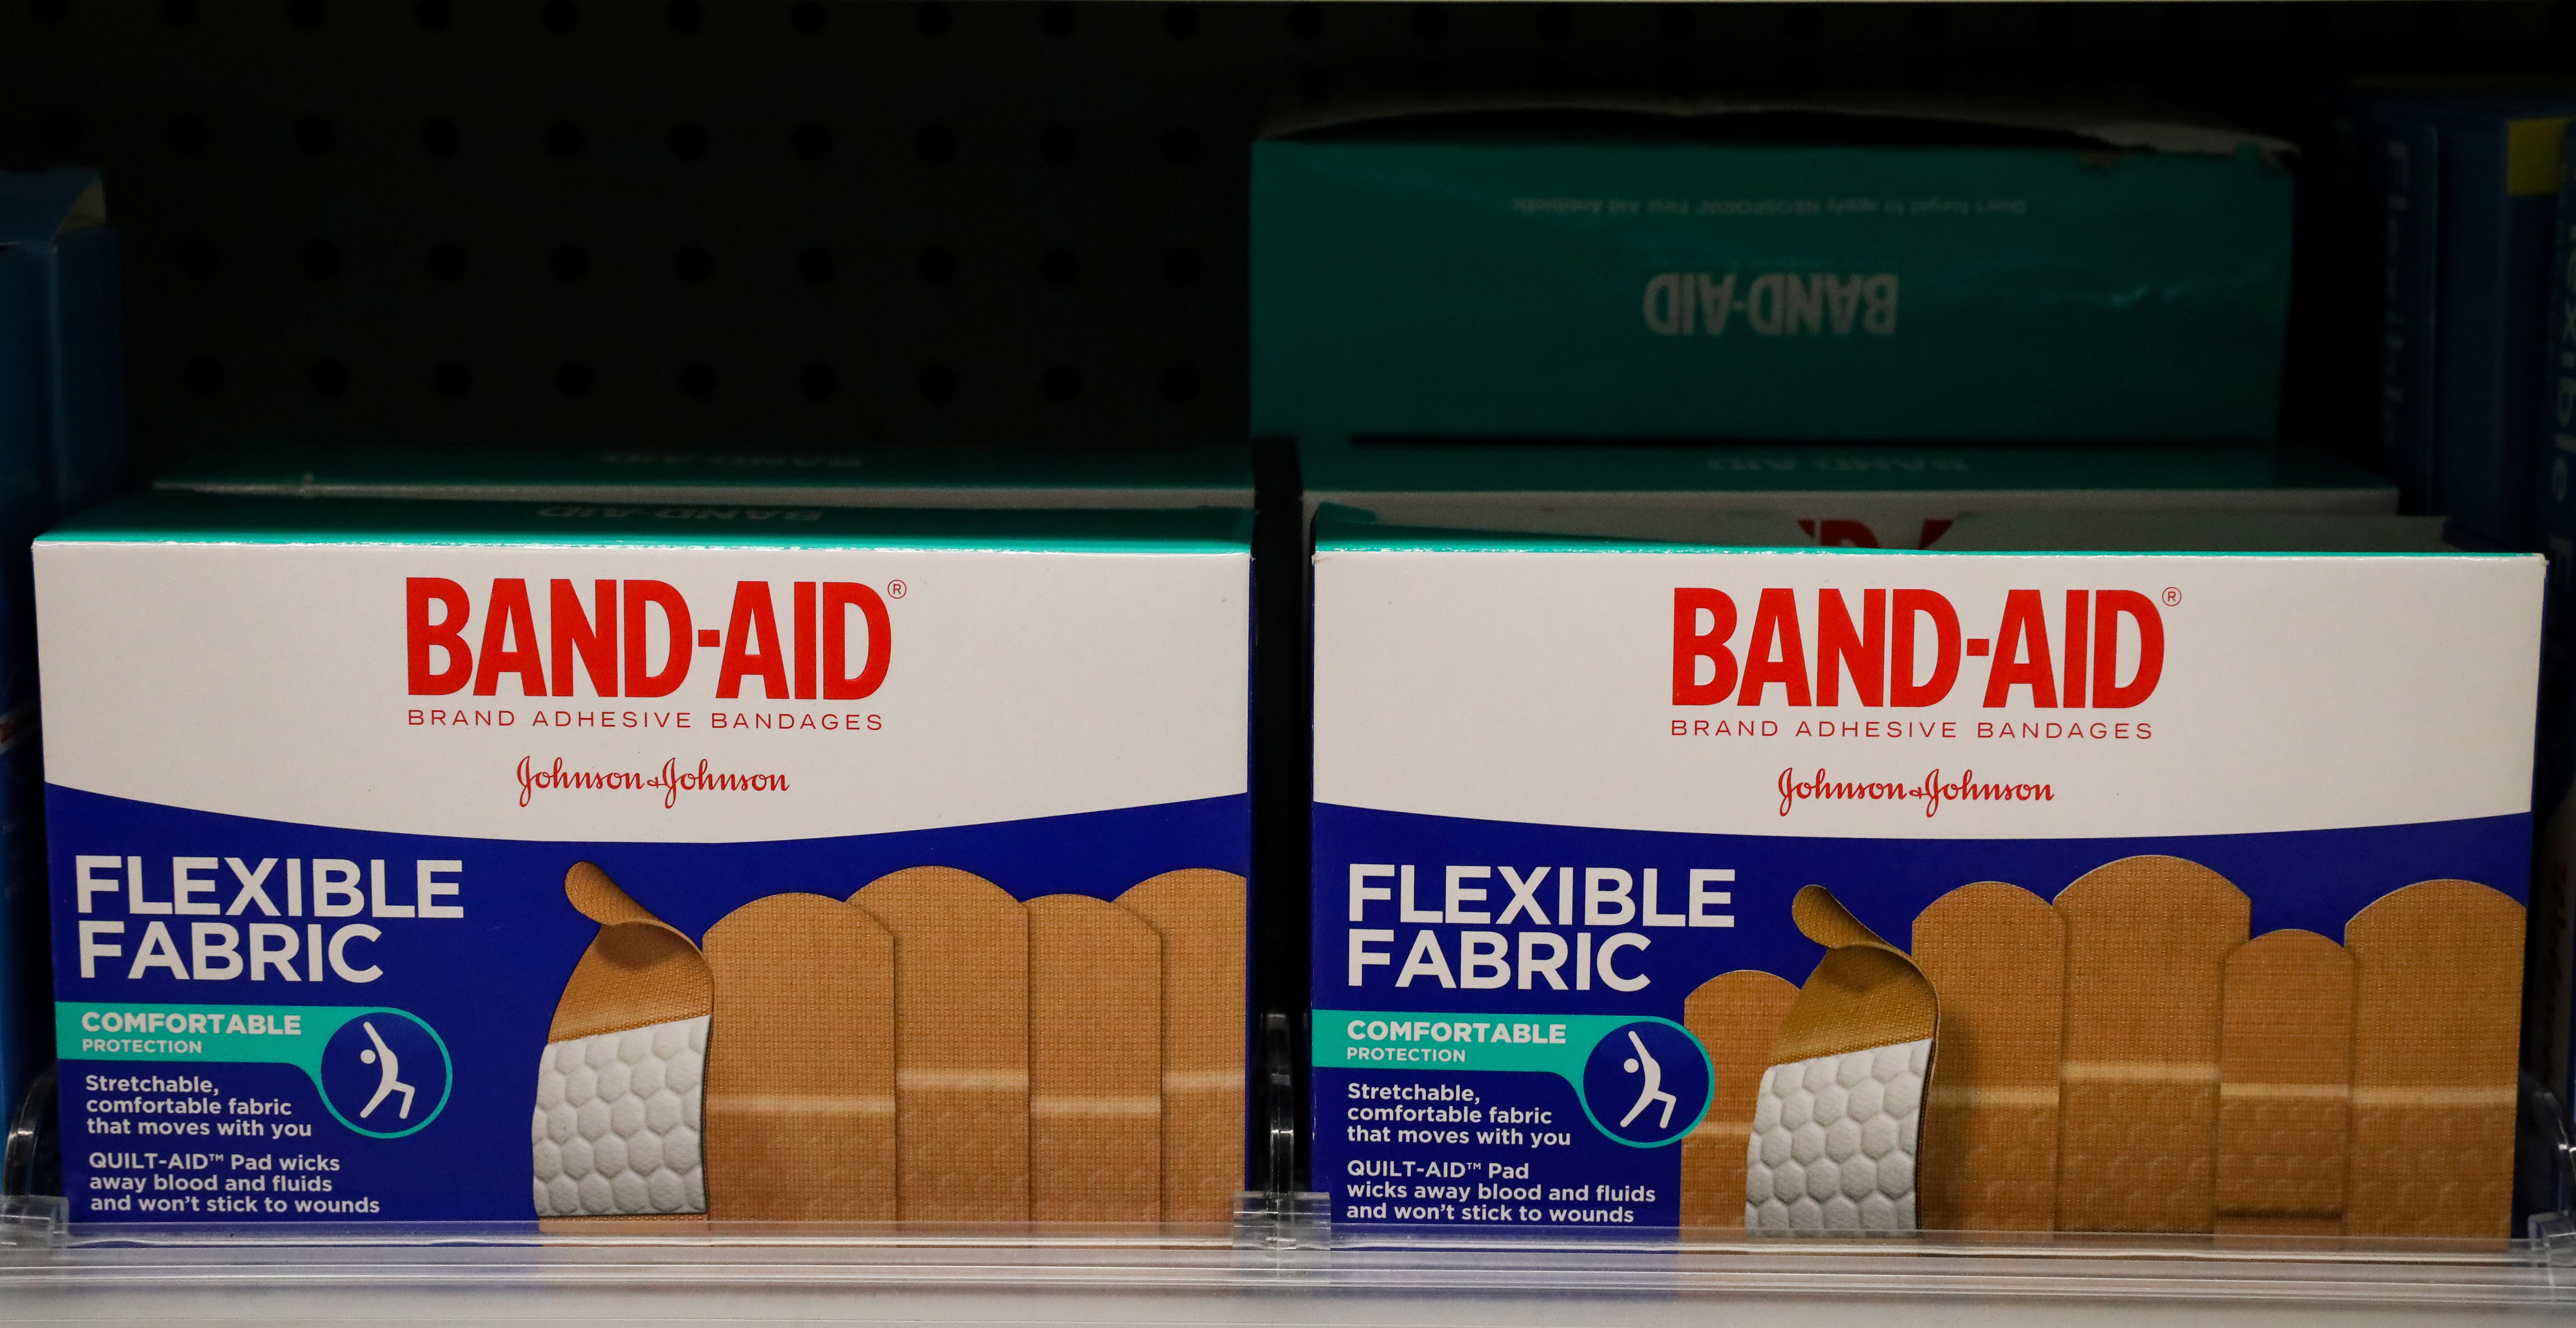 Band-Aid brand bandages, by Johnson & Johnson, are displayed in a store in New York